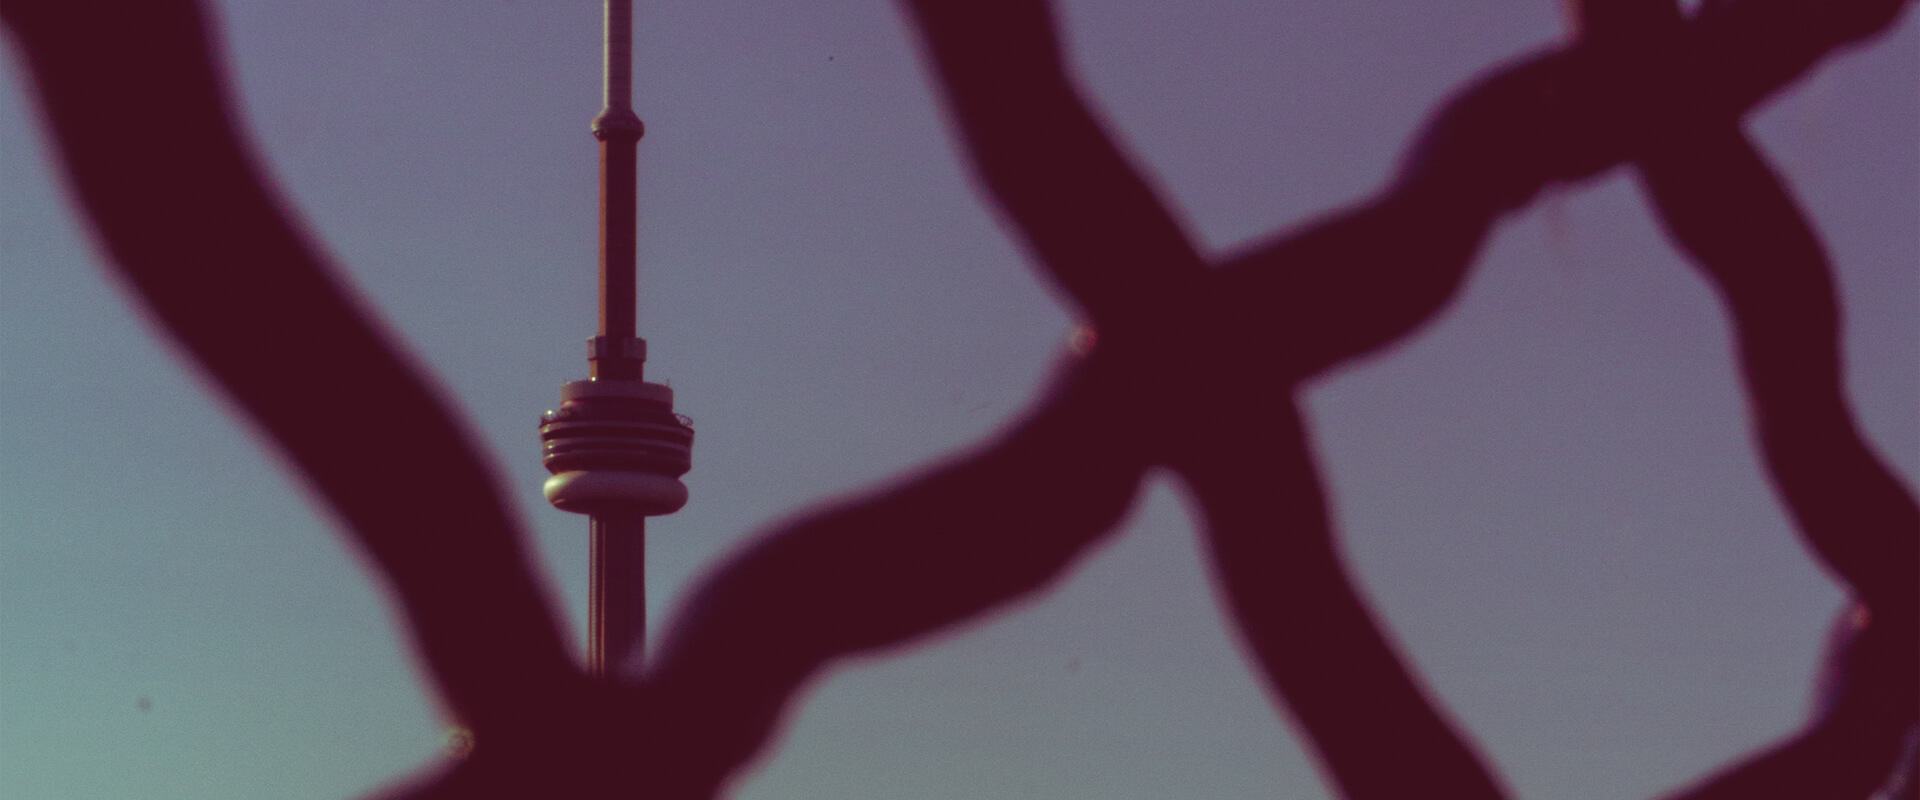 Photo of CN Tower through the fence